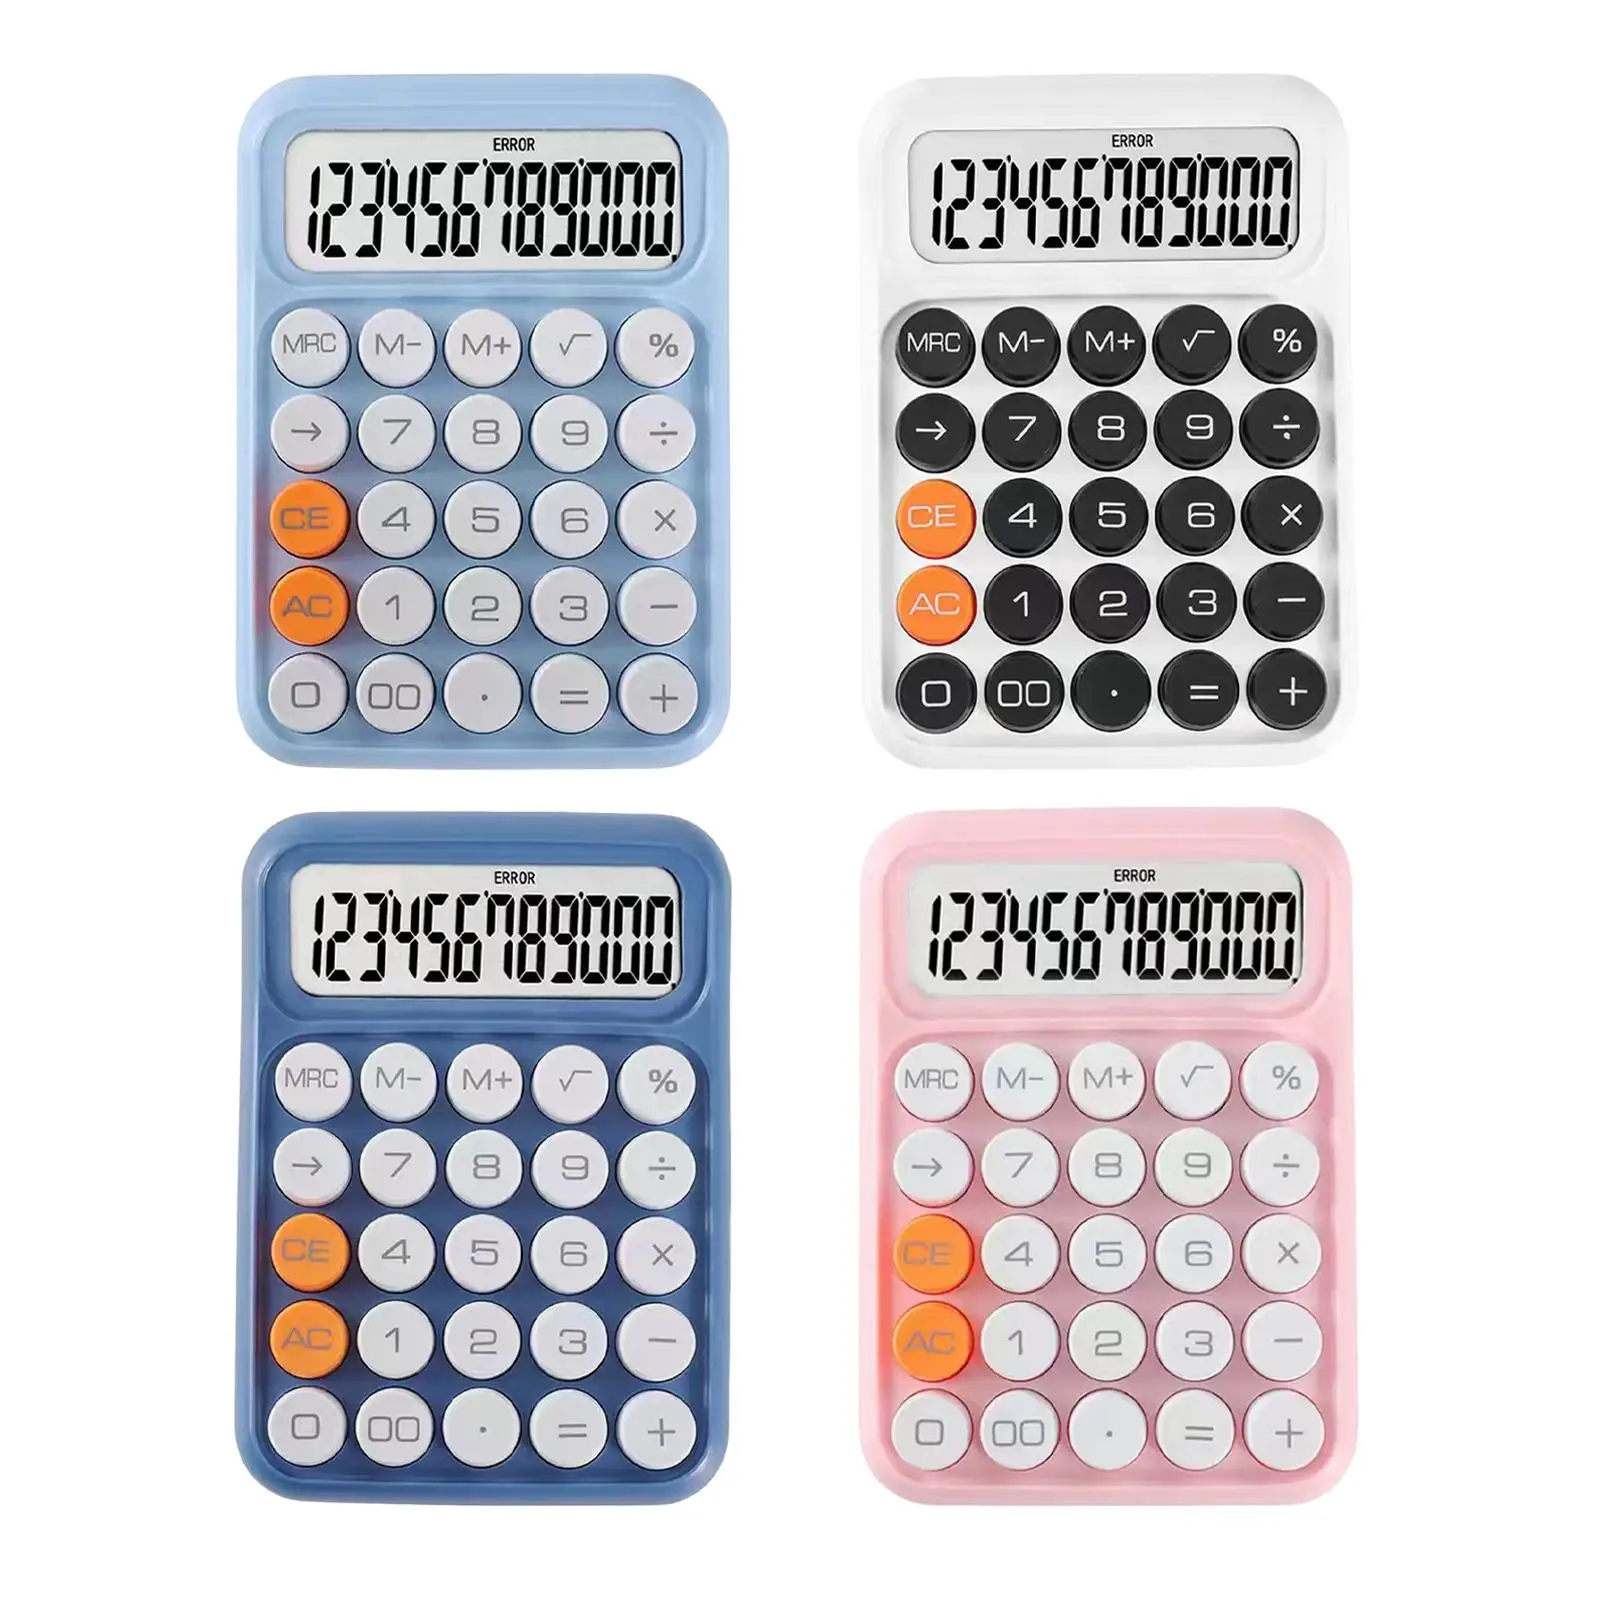 12 Digit Calculator Portable Large Display Cute Multifunctional Pocket Basic Calculator for Travel Daily Use Home Business Use